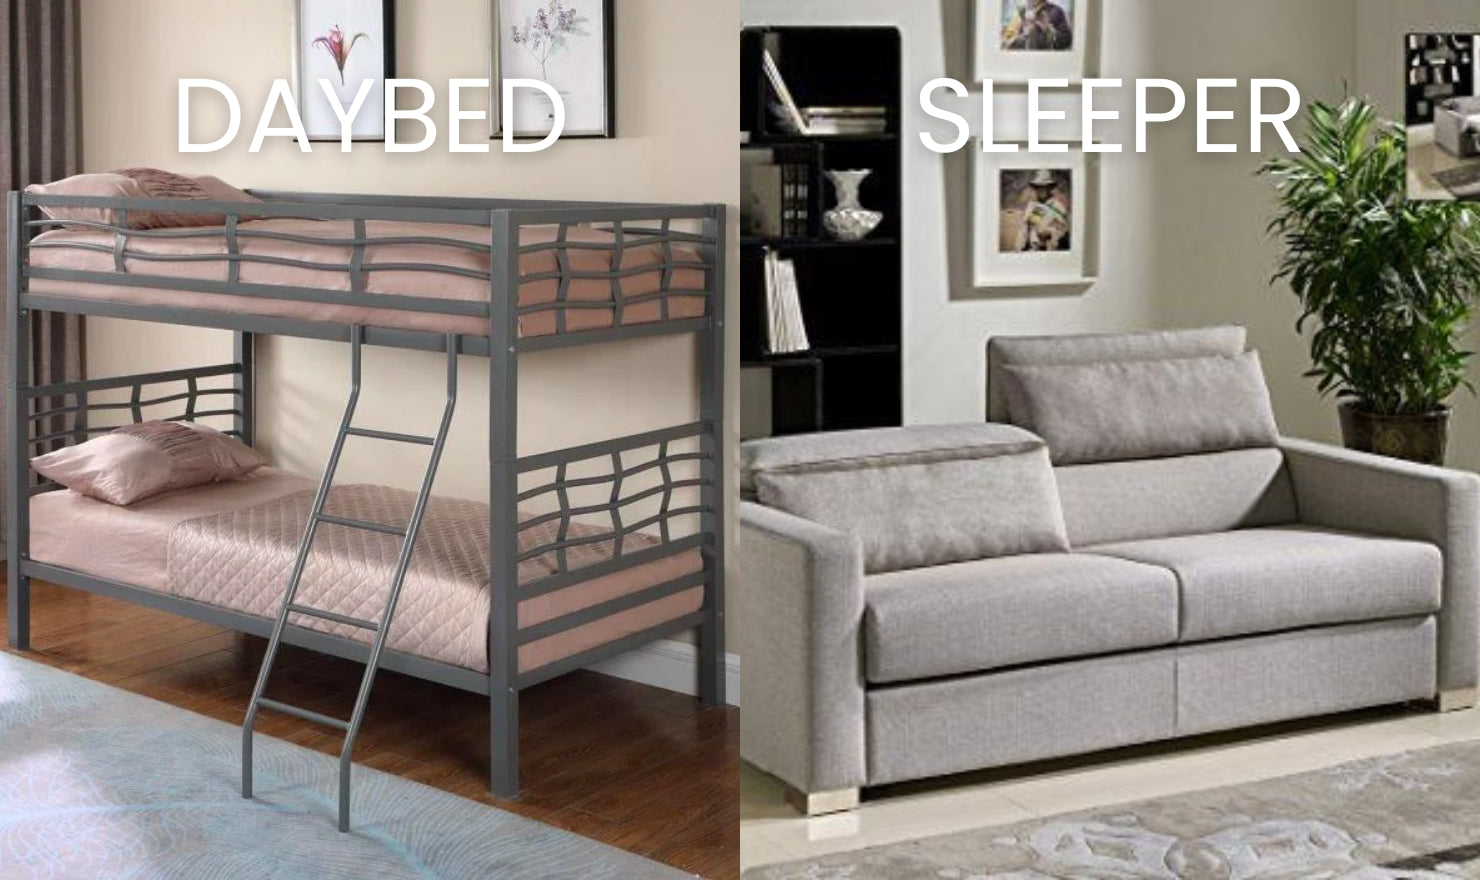 Differences Between a Daybed and a Sleeper